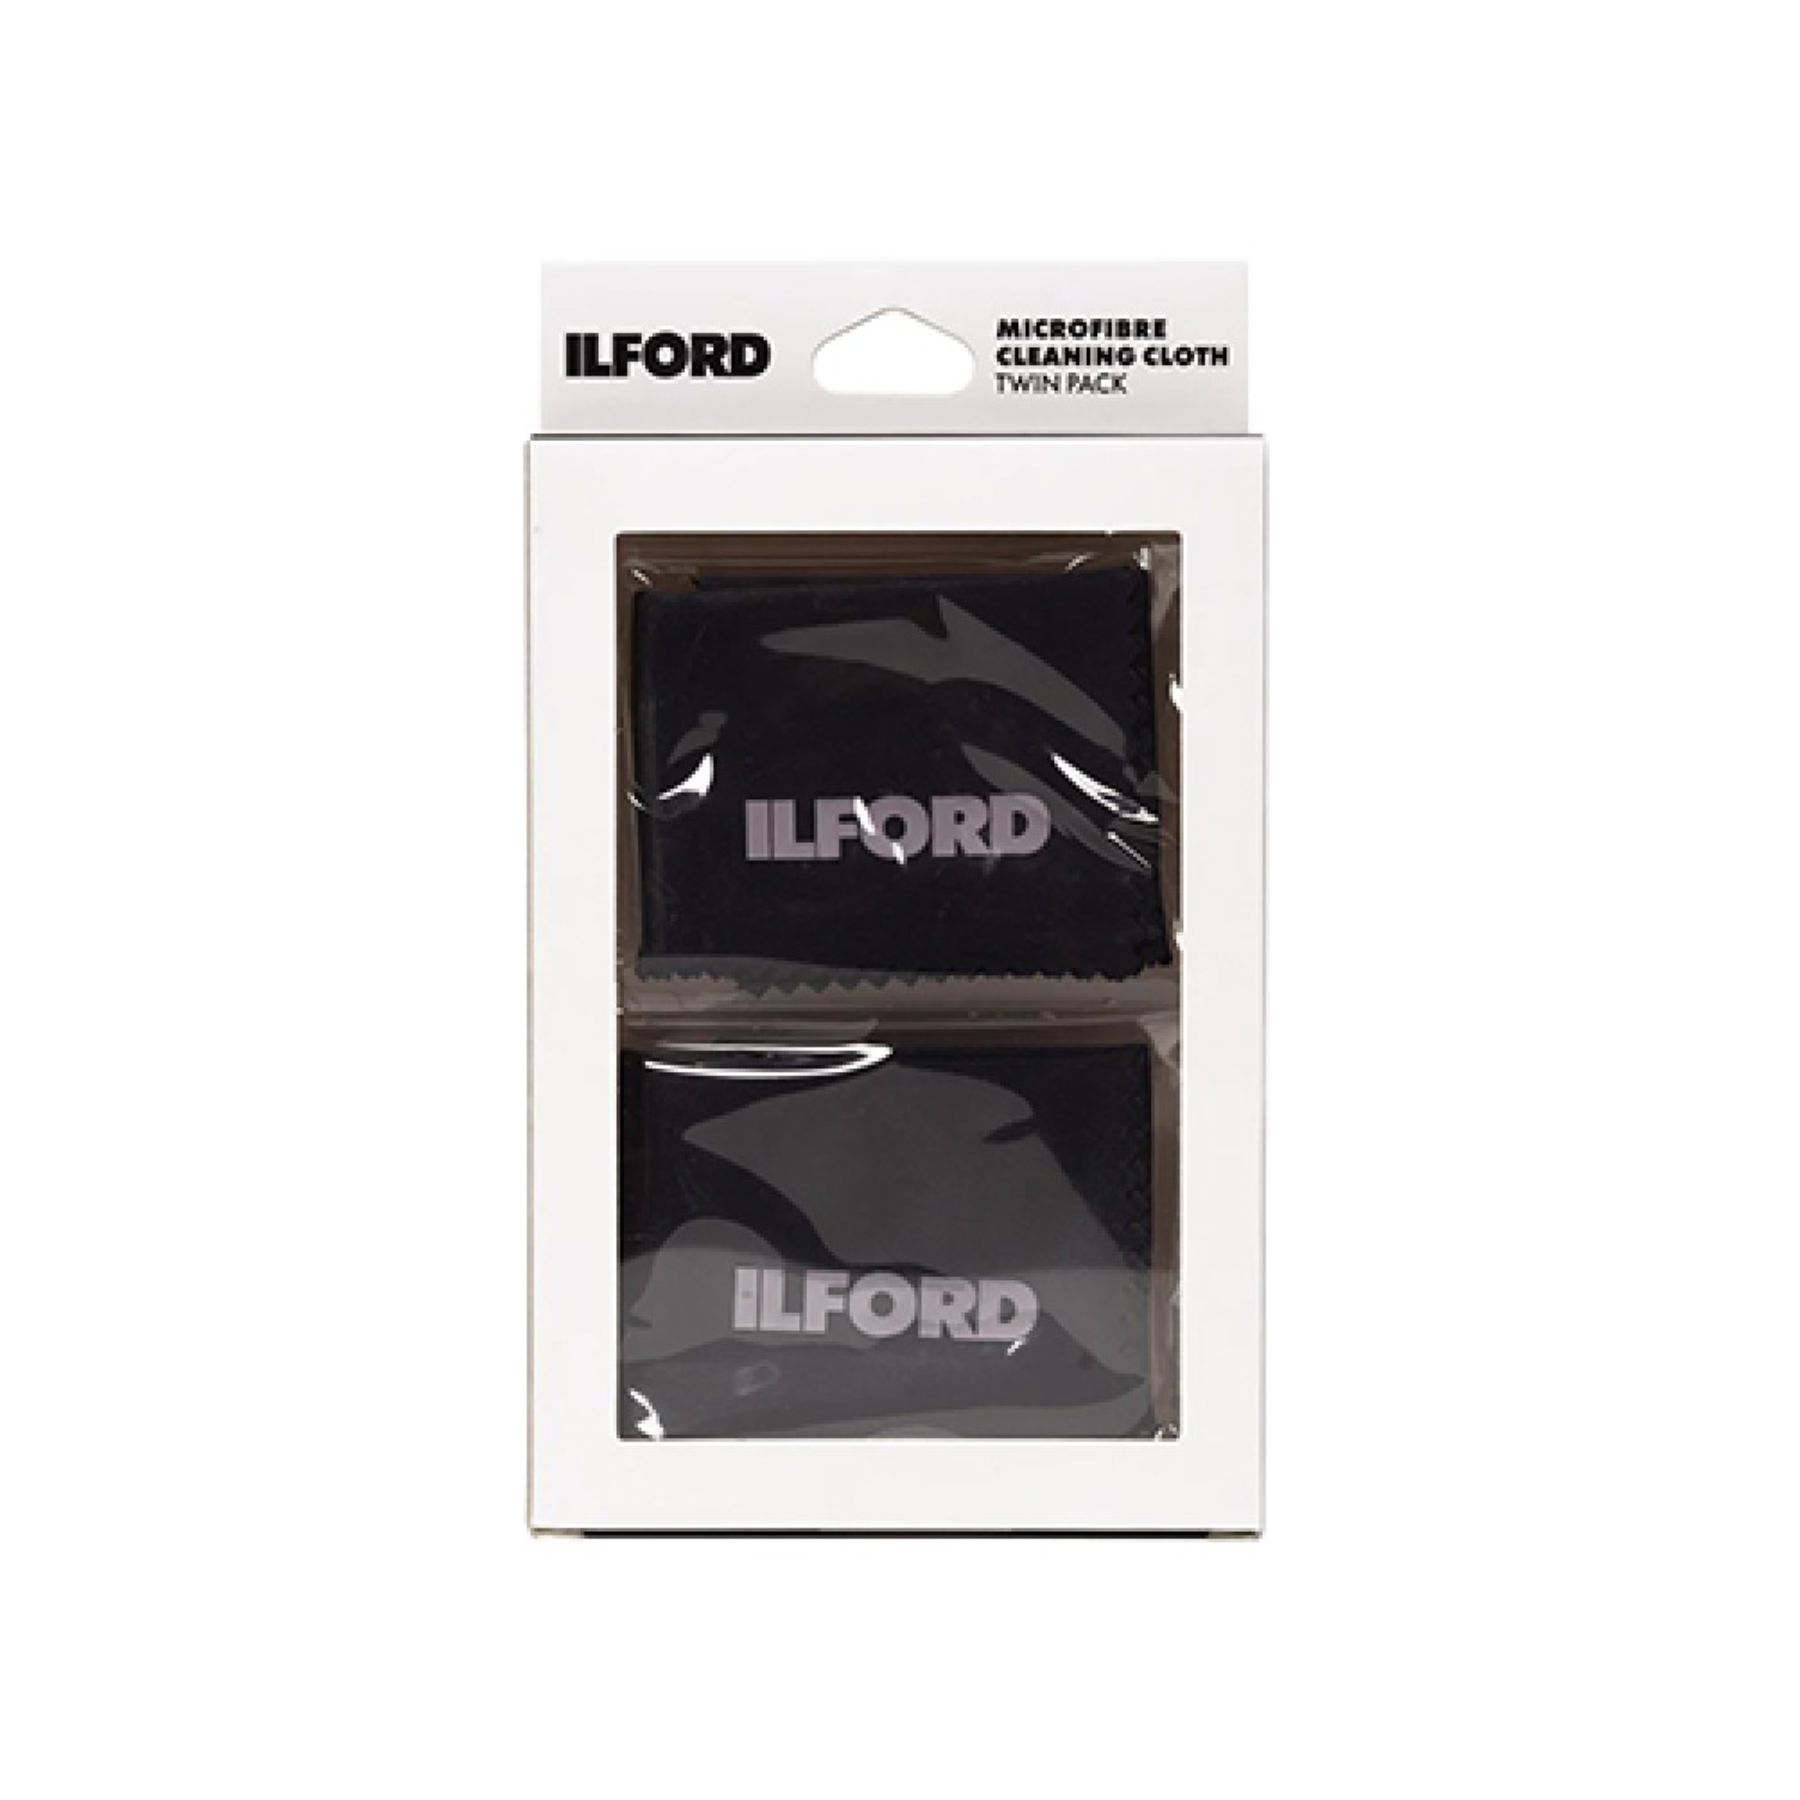 Buy Ilford Microfibre Cleaning Cloth Twin Pack at Topic Store